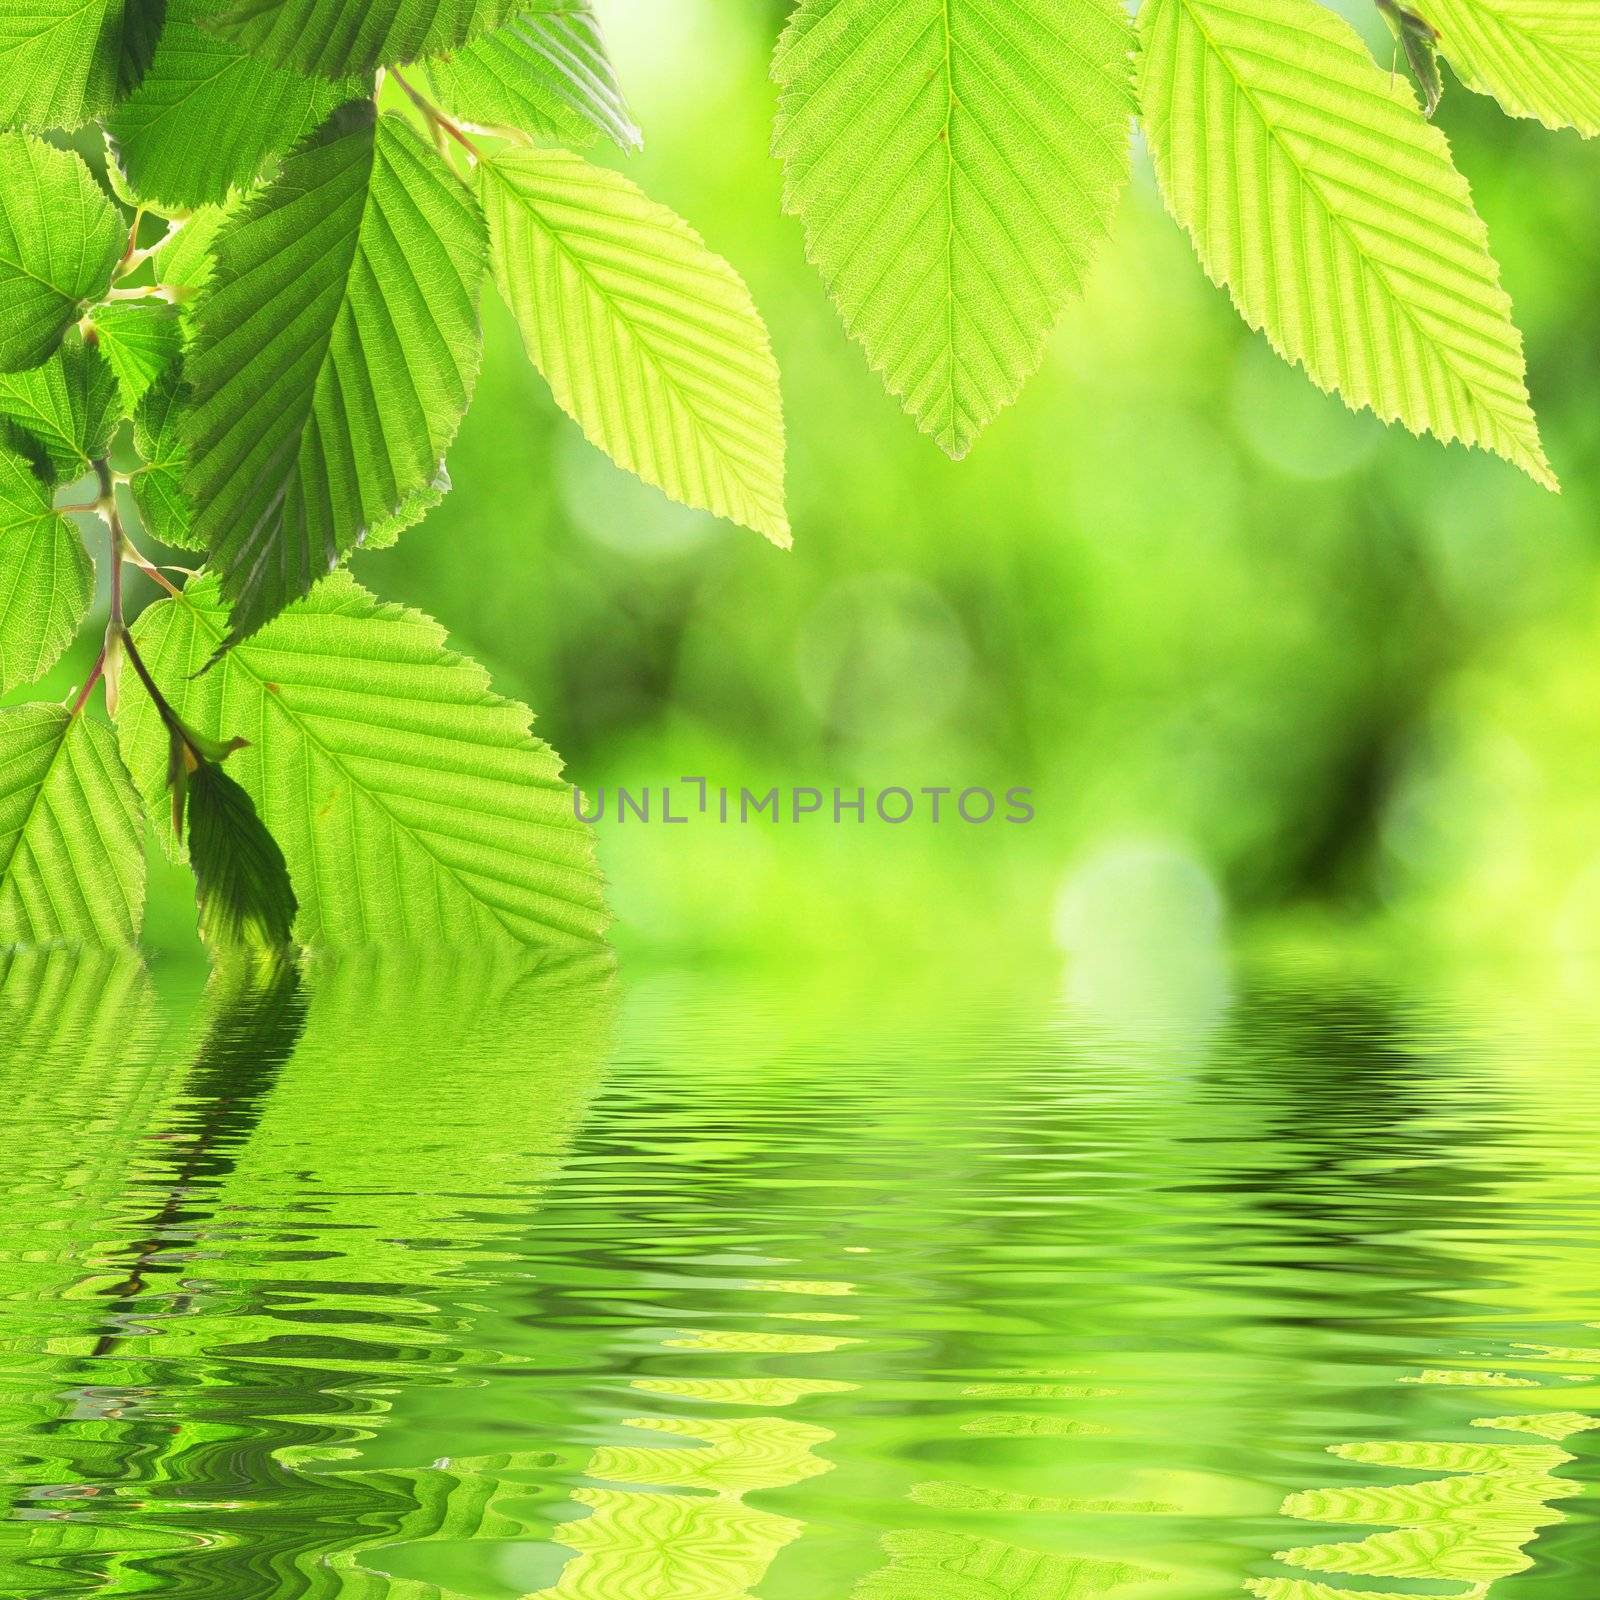 green leave and water by gunnar3000